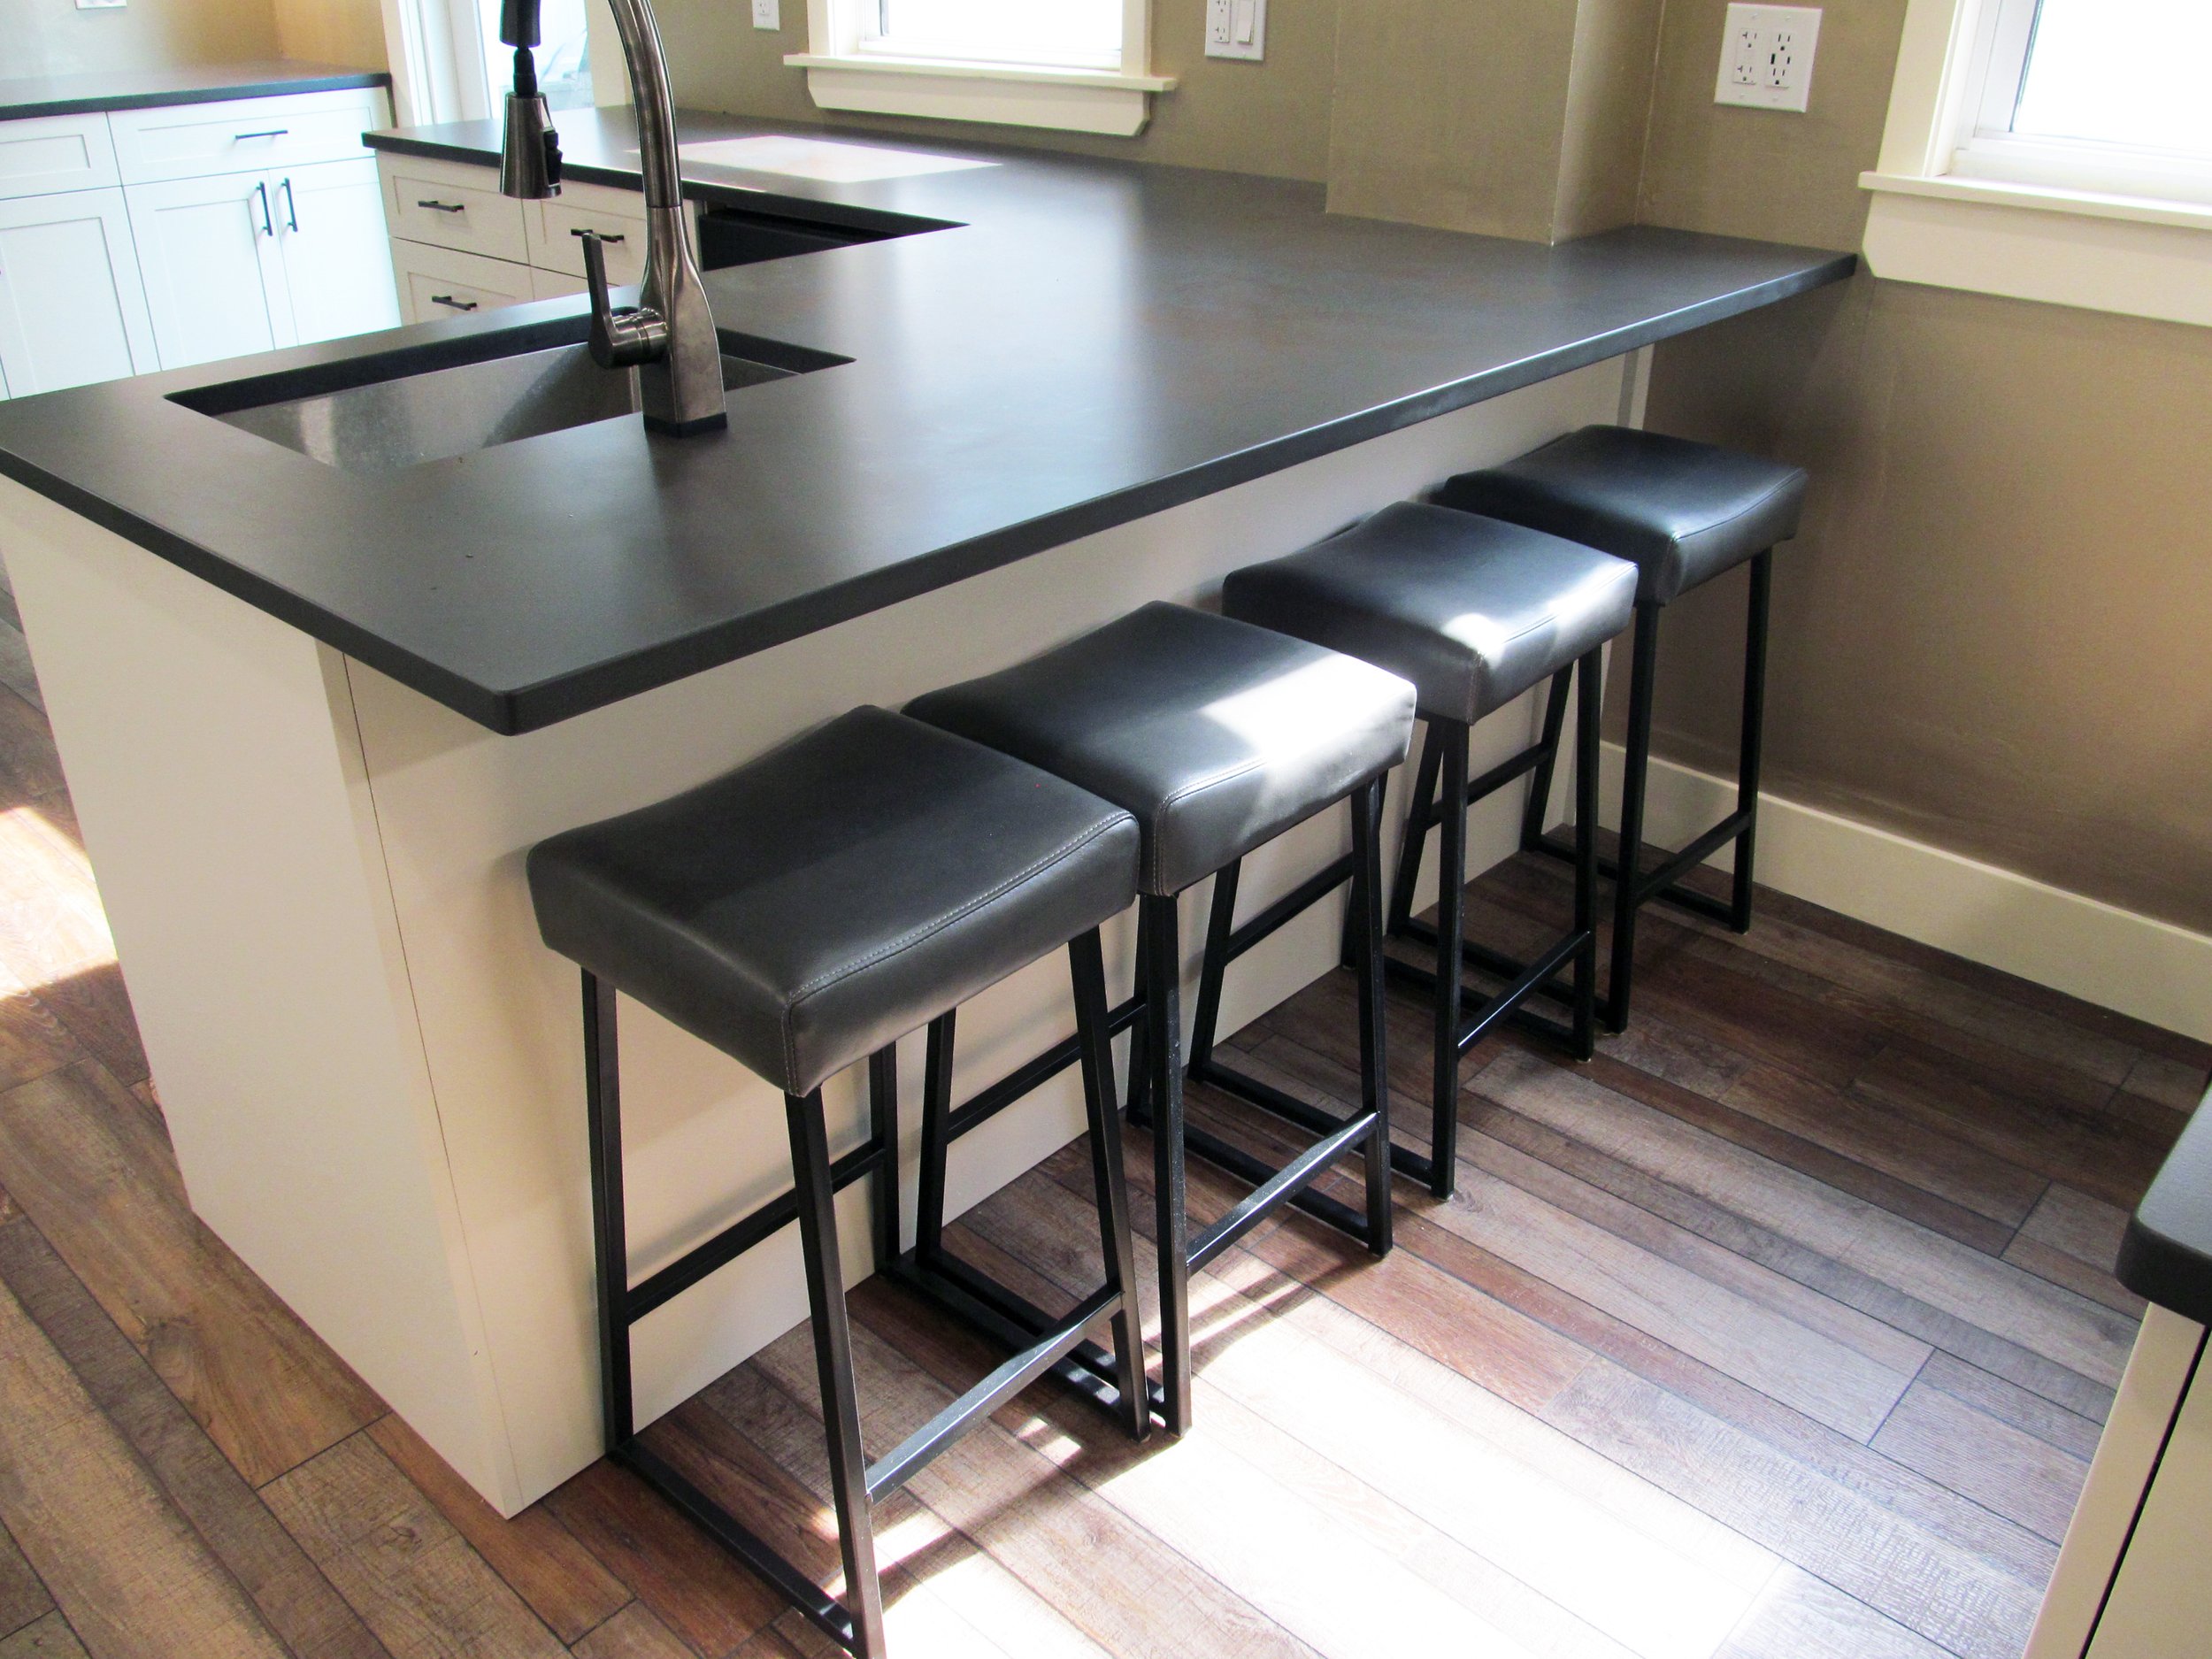 Counter seating is perfect for a quick meal or cup of tea